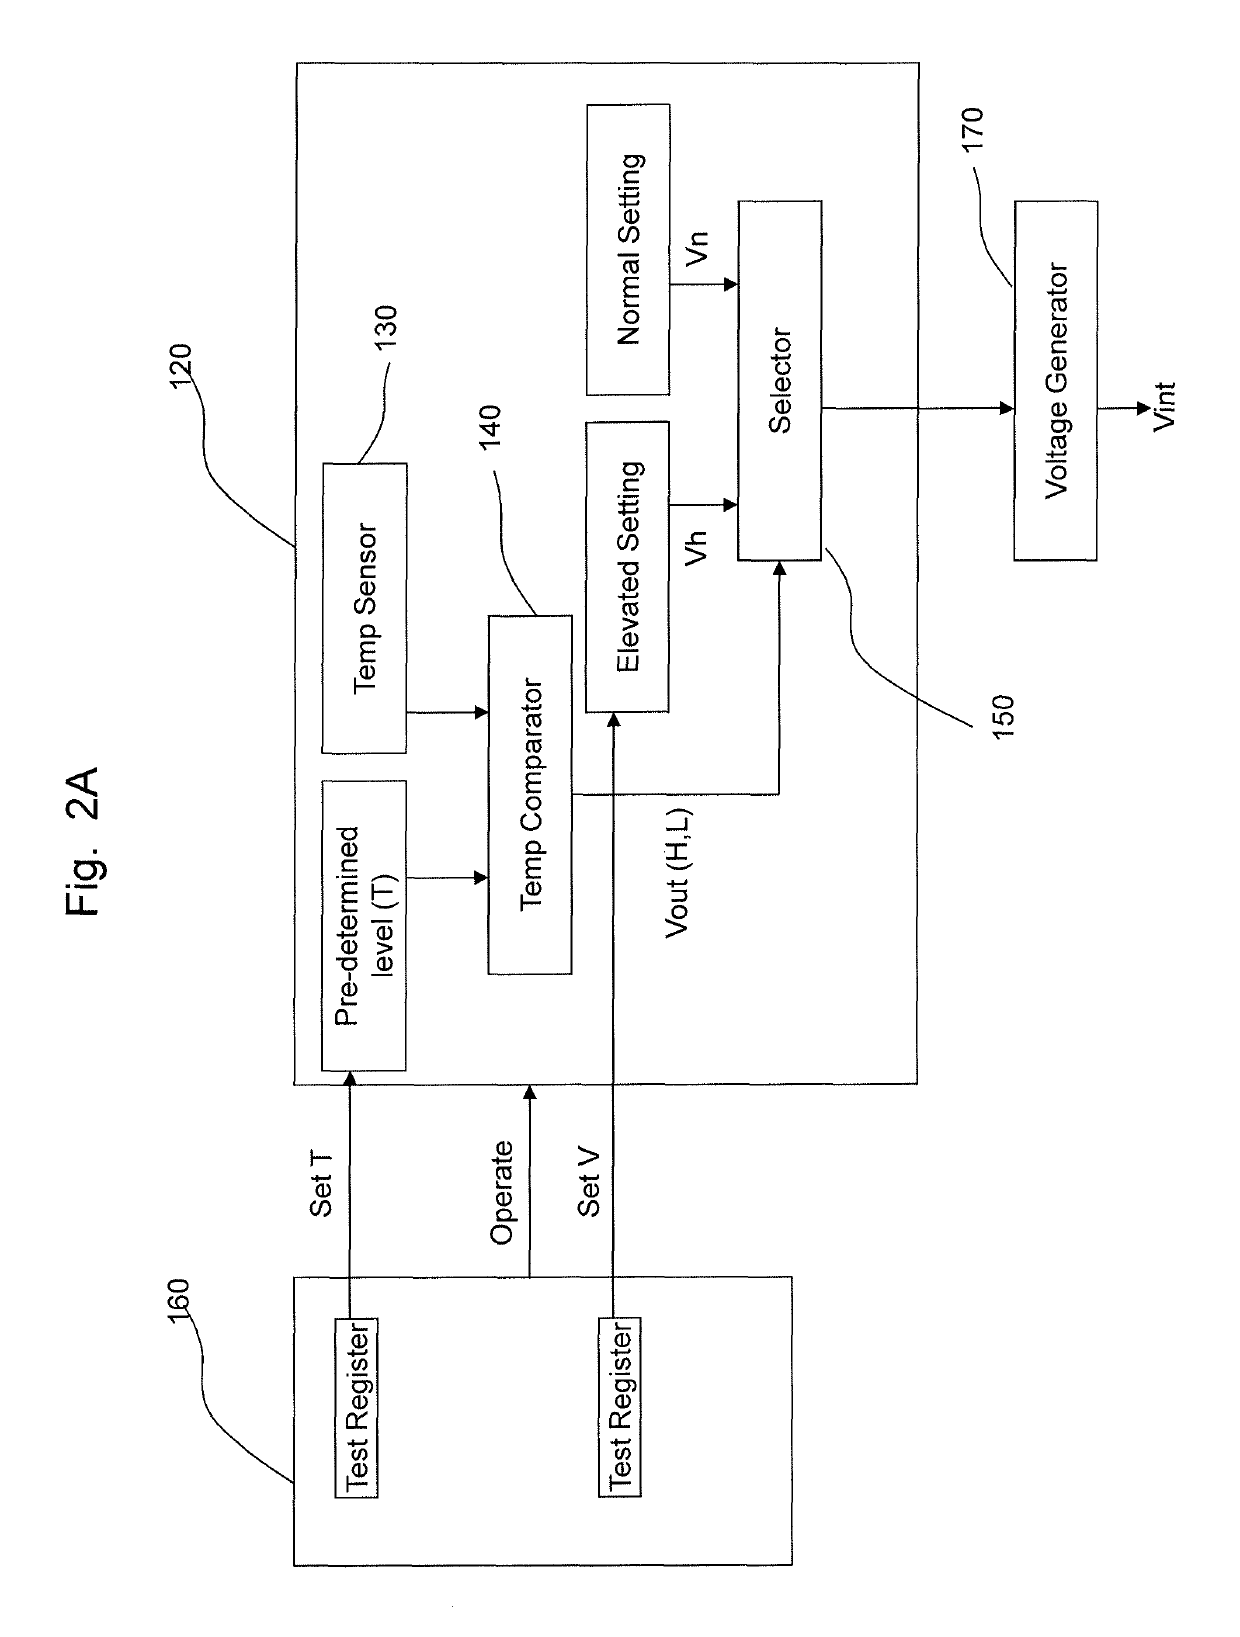 Overheat protection circuit and method in an accelerated aging test of an integrated circuit